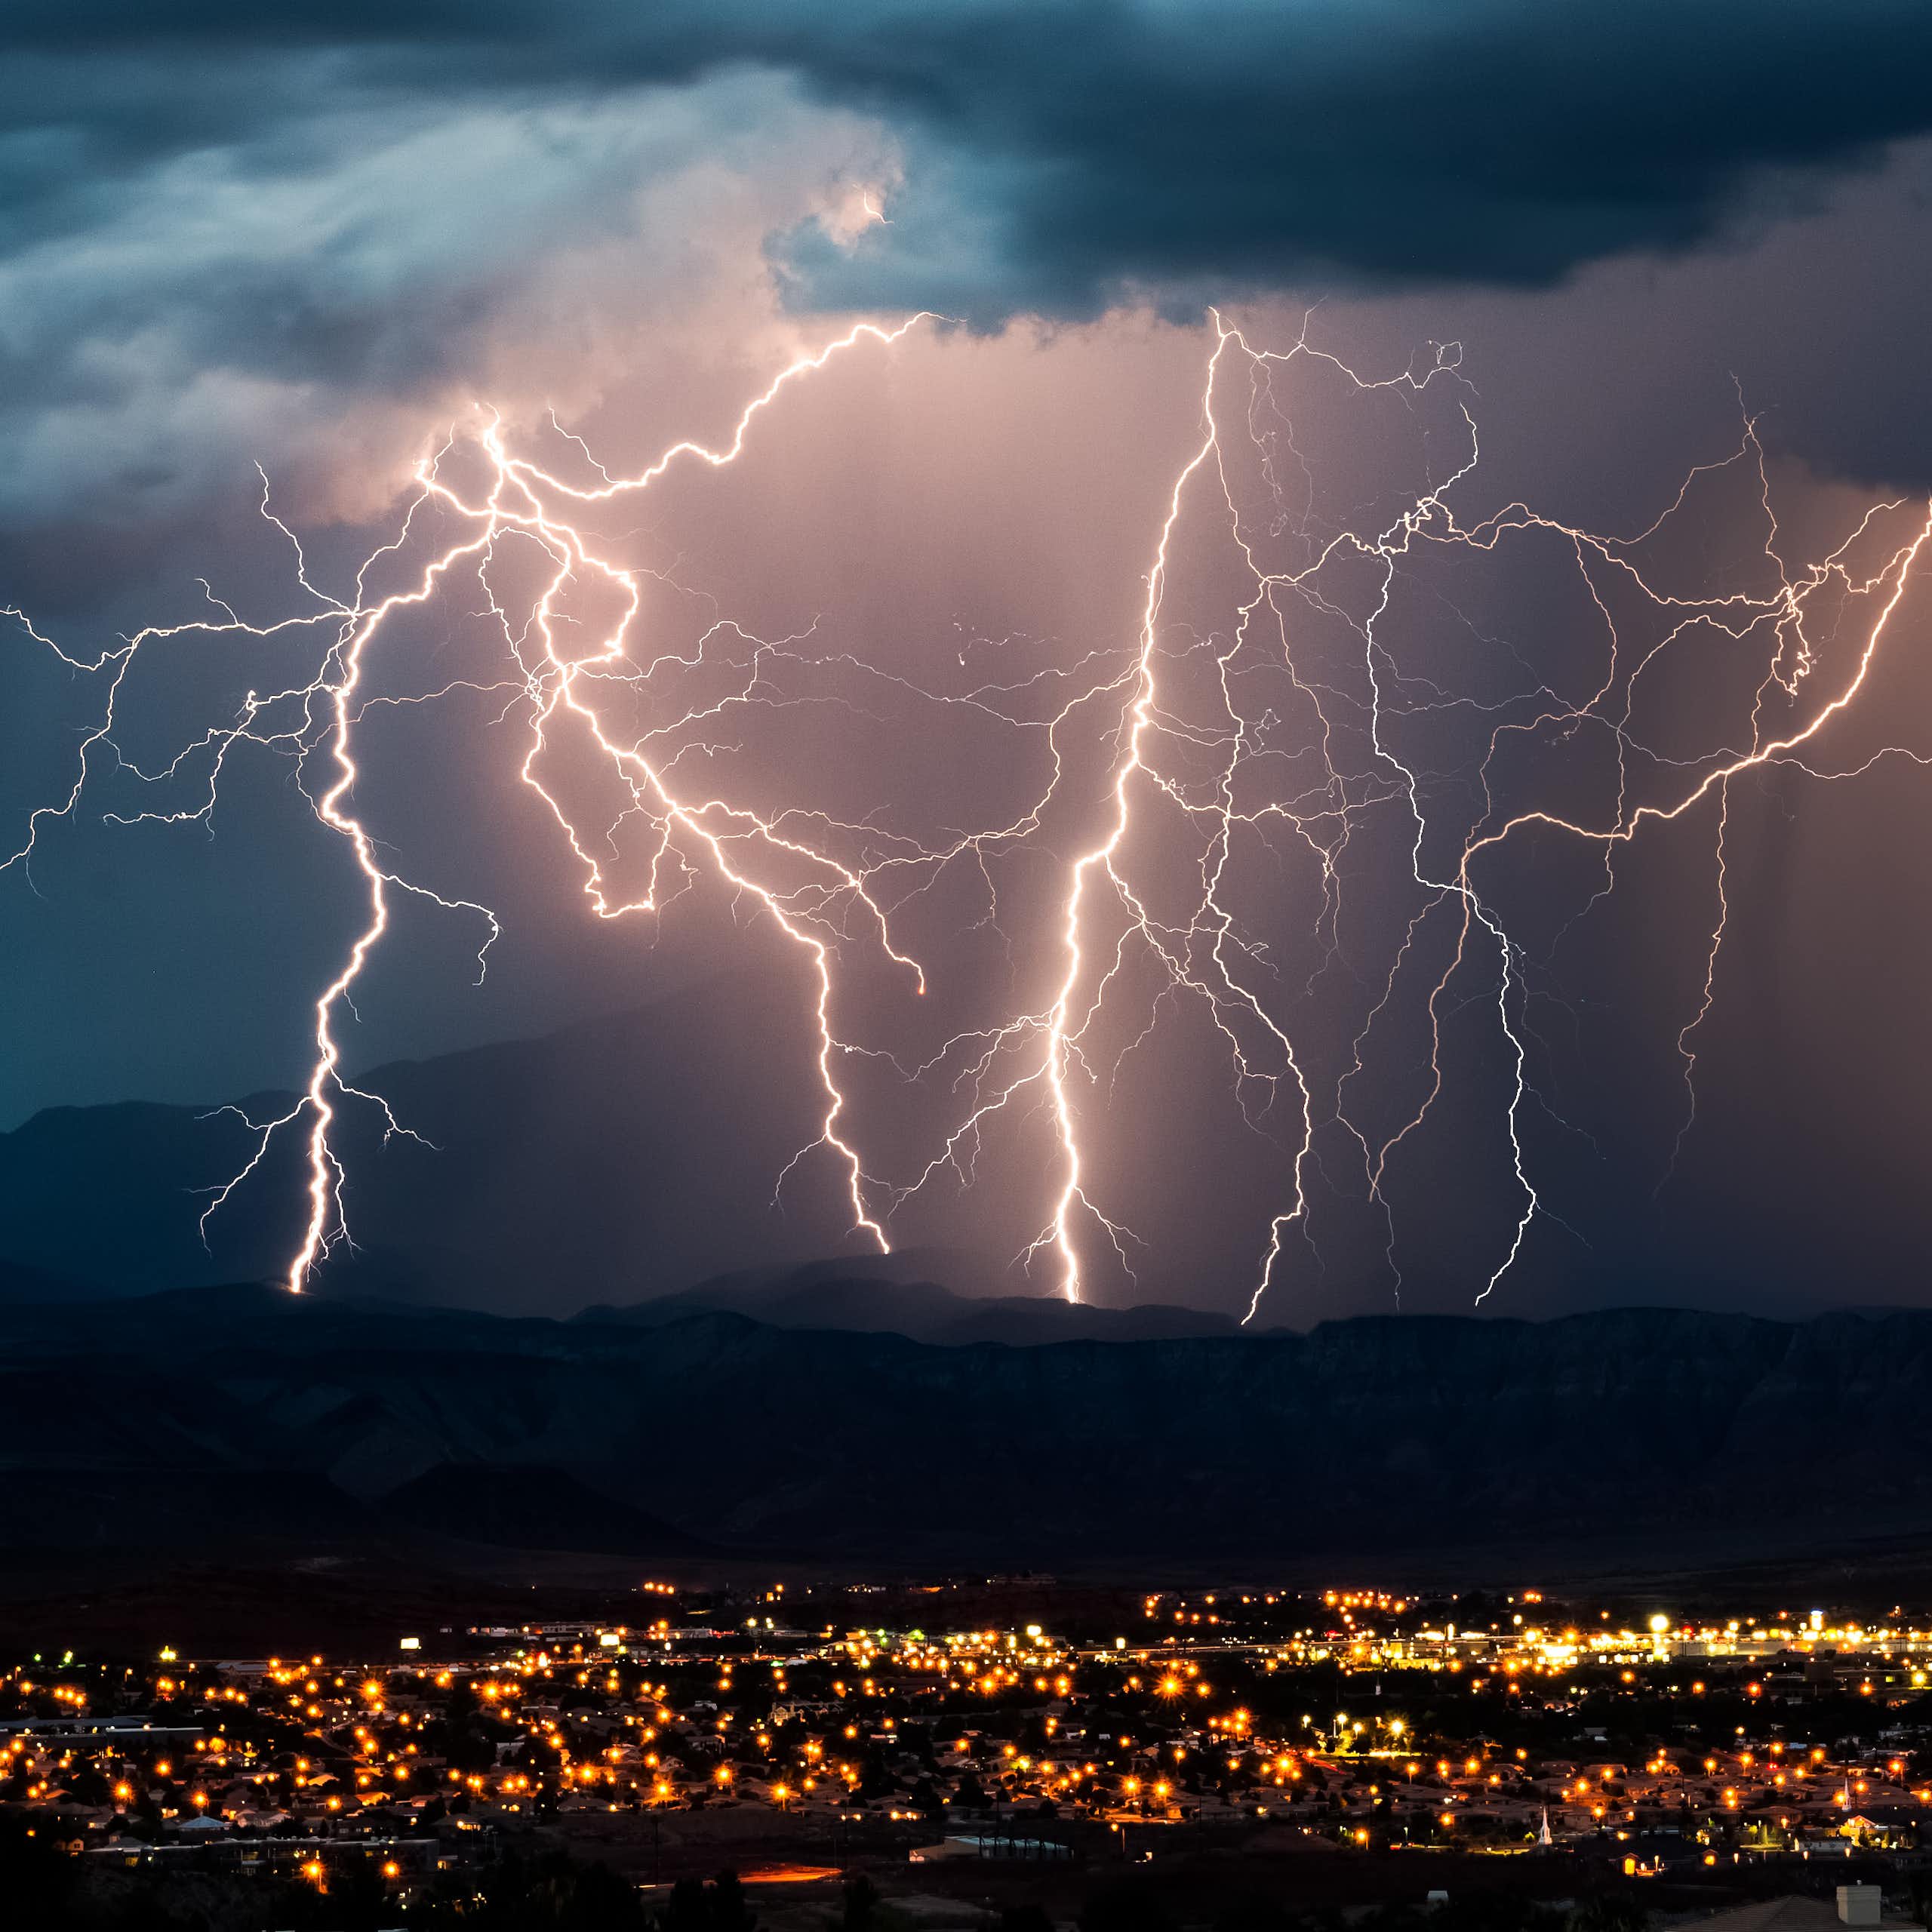 Multiple lightning strikes hit the mountains in the background beyond the lights of a town.